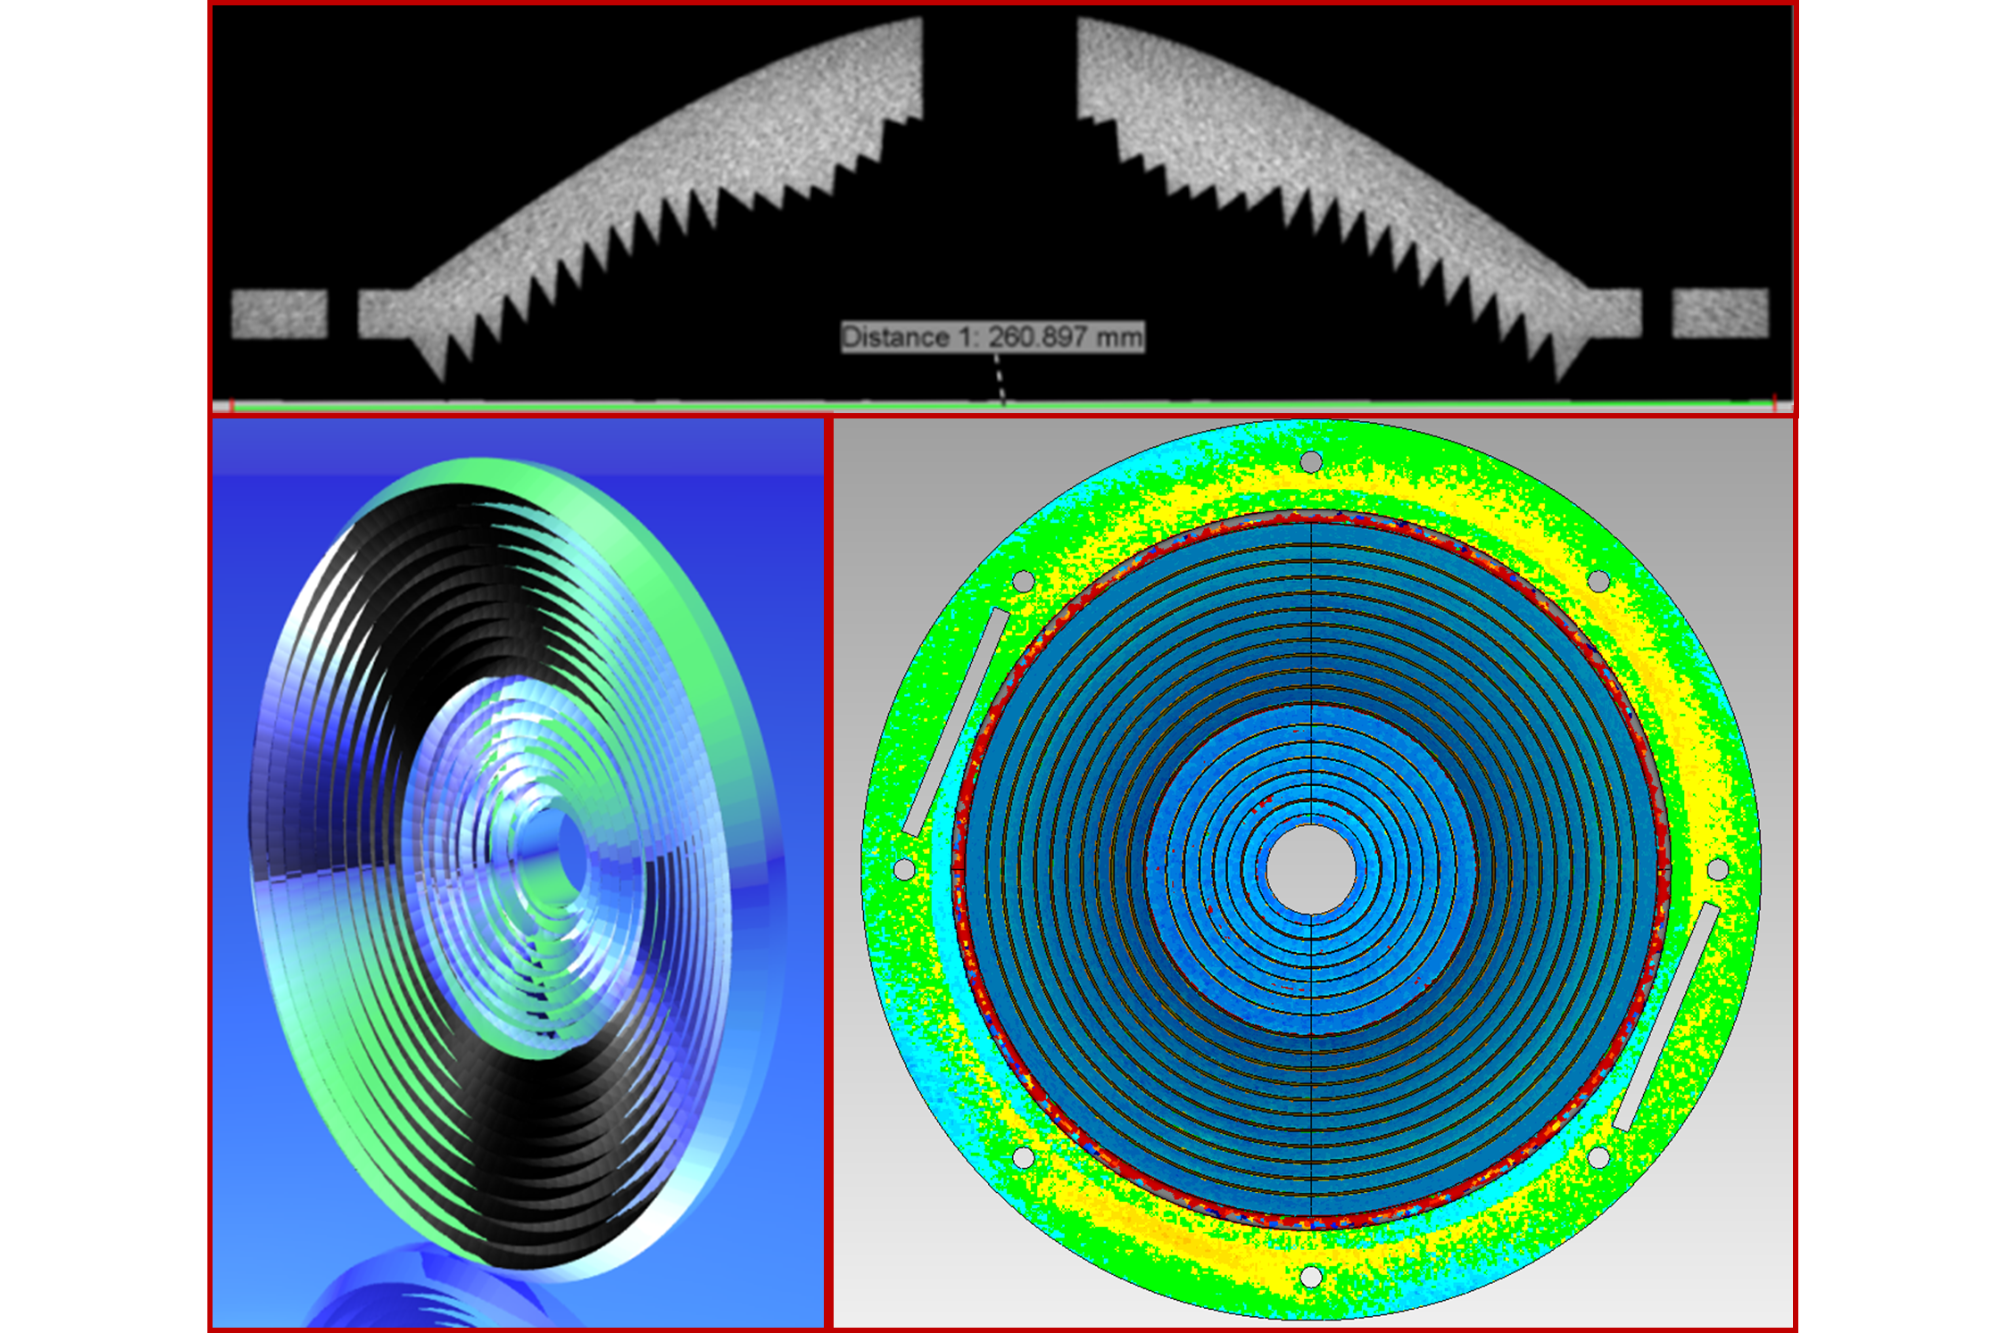 Metric analysis of a Fresnel freeform lens made of PMMA using CT and color 3D comparison of the surface against the CAD model